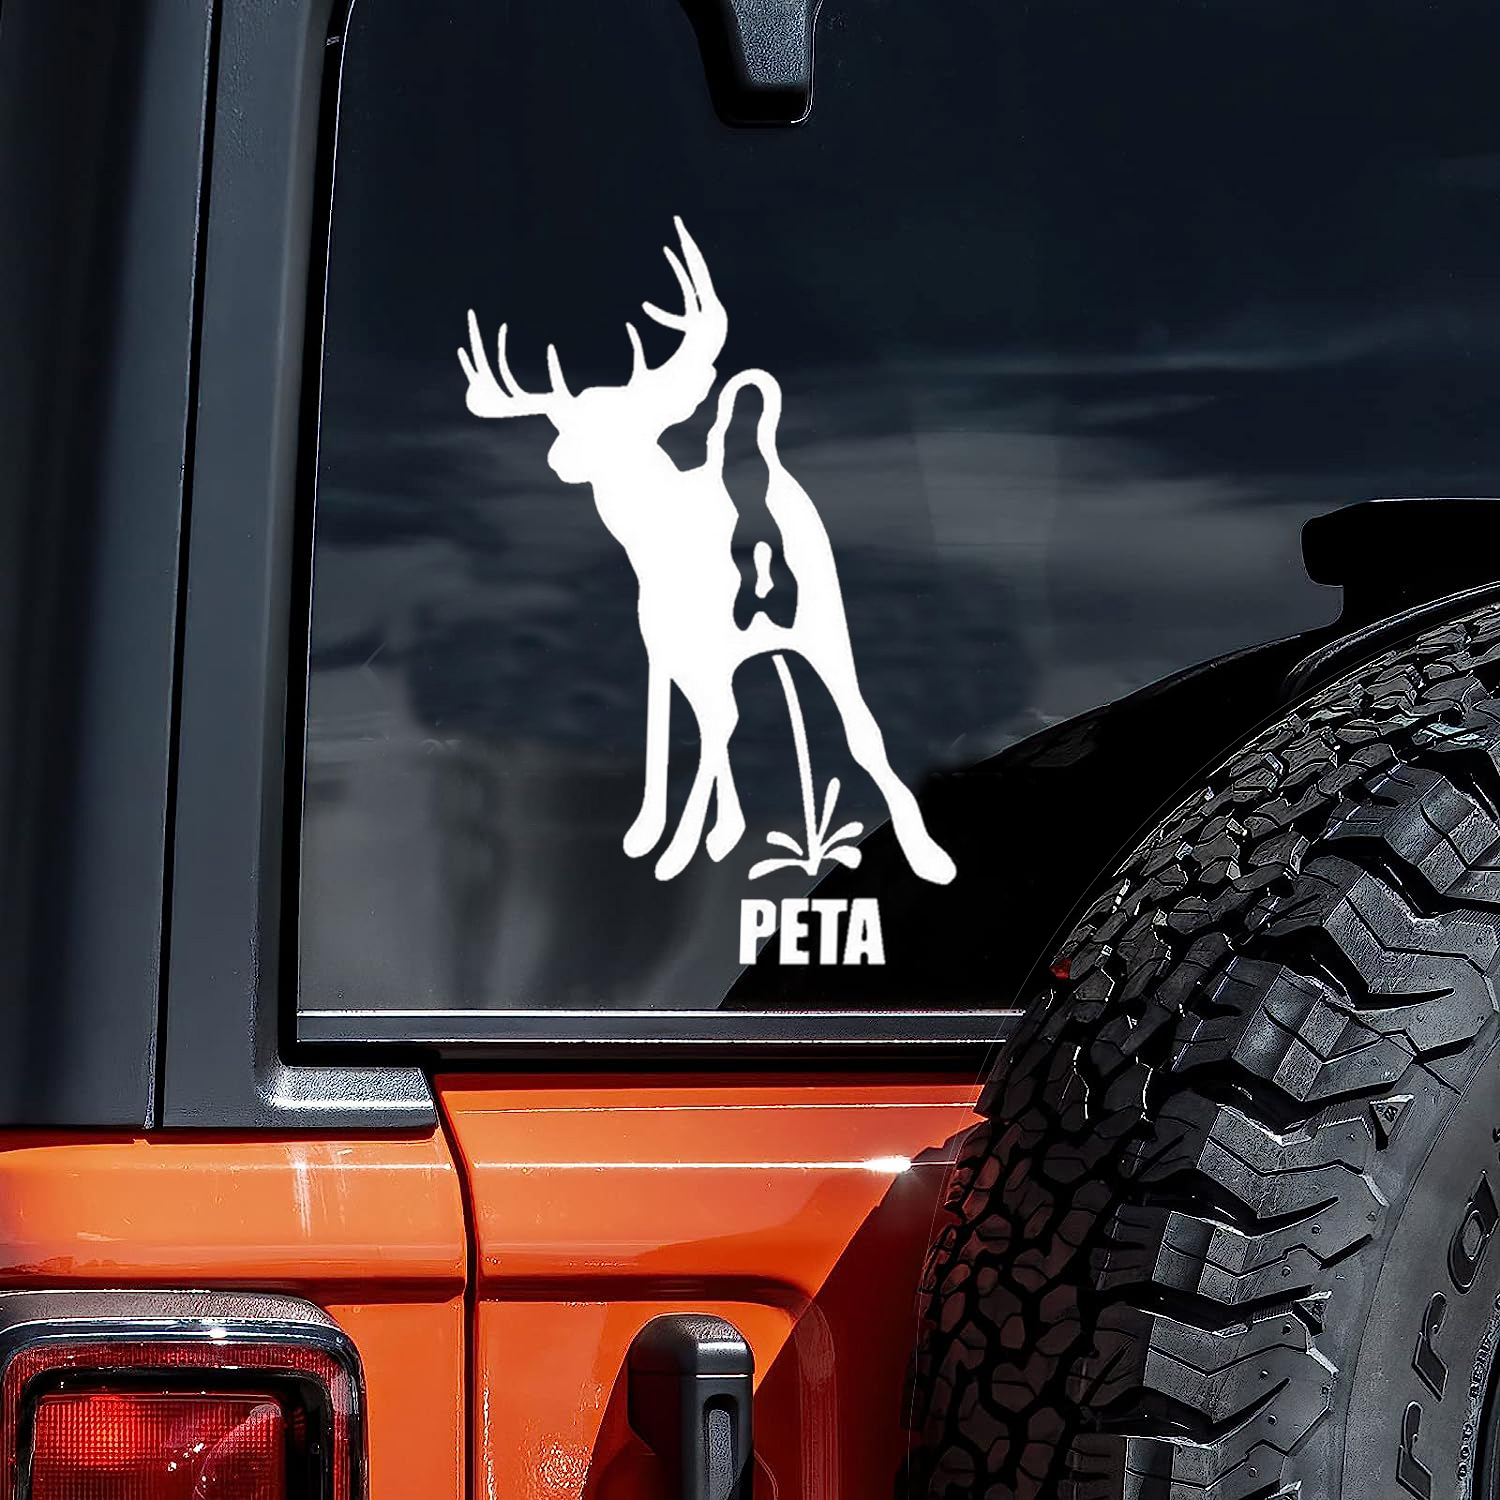 Hunt Fish Run Decal, Hunting Fishing Decal, Sportsman Decal, Hunting Car  Sticker, Fishing Laptop Decal, Gift for Men, Gift for Him, USA